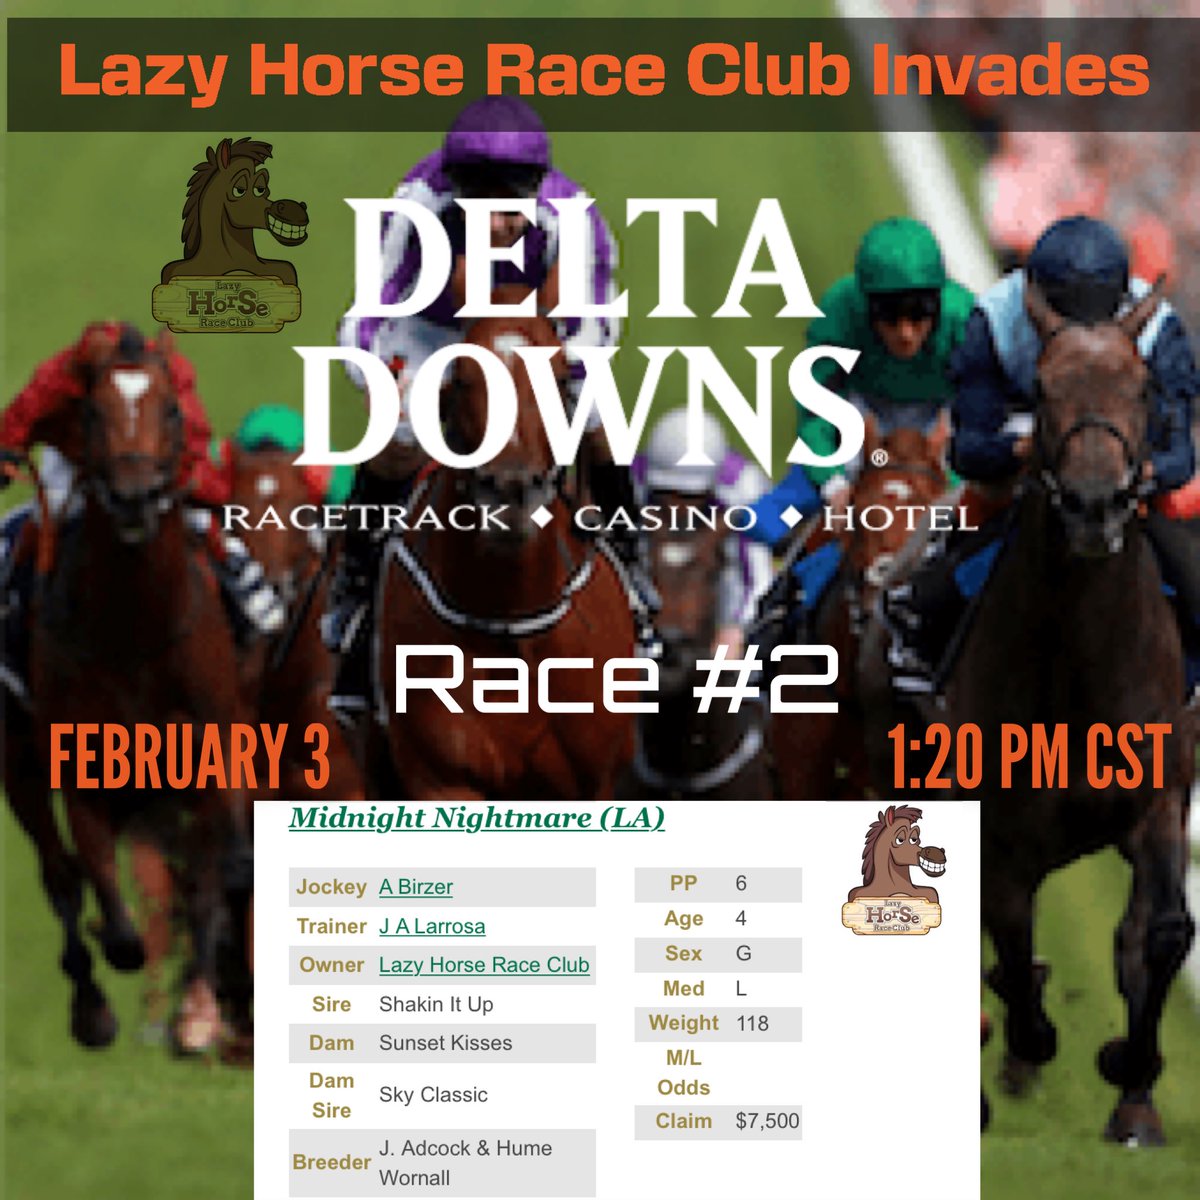 The inaugural race of #LazyHorseRaceClub is posted!  Join us at the track or via live stream on Feb 3rd to watch #MidnightNightmare run for our IRL team at #DeltaDowns - all #LazyHorses are welcome! 🏇Giddy up! 🏇#LHRC 
 equibase.com/static/entry/D… #CRO #CroFam